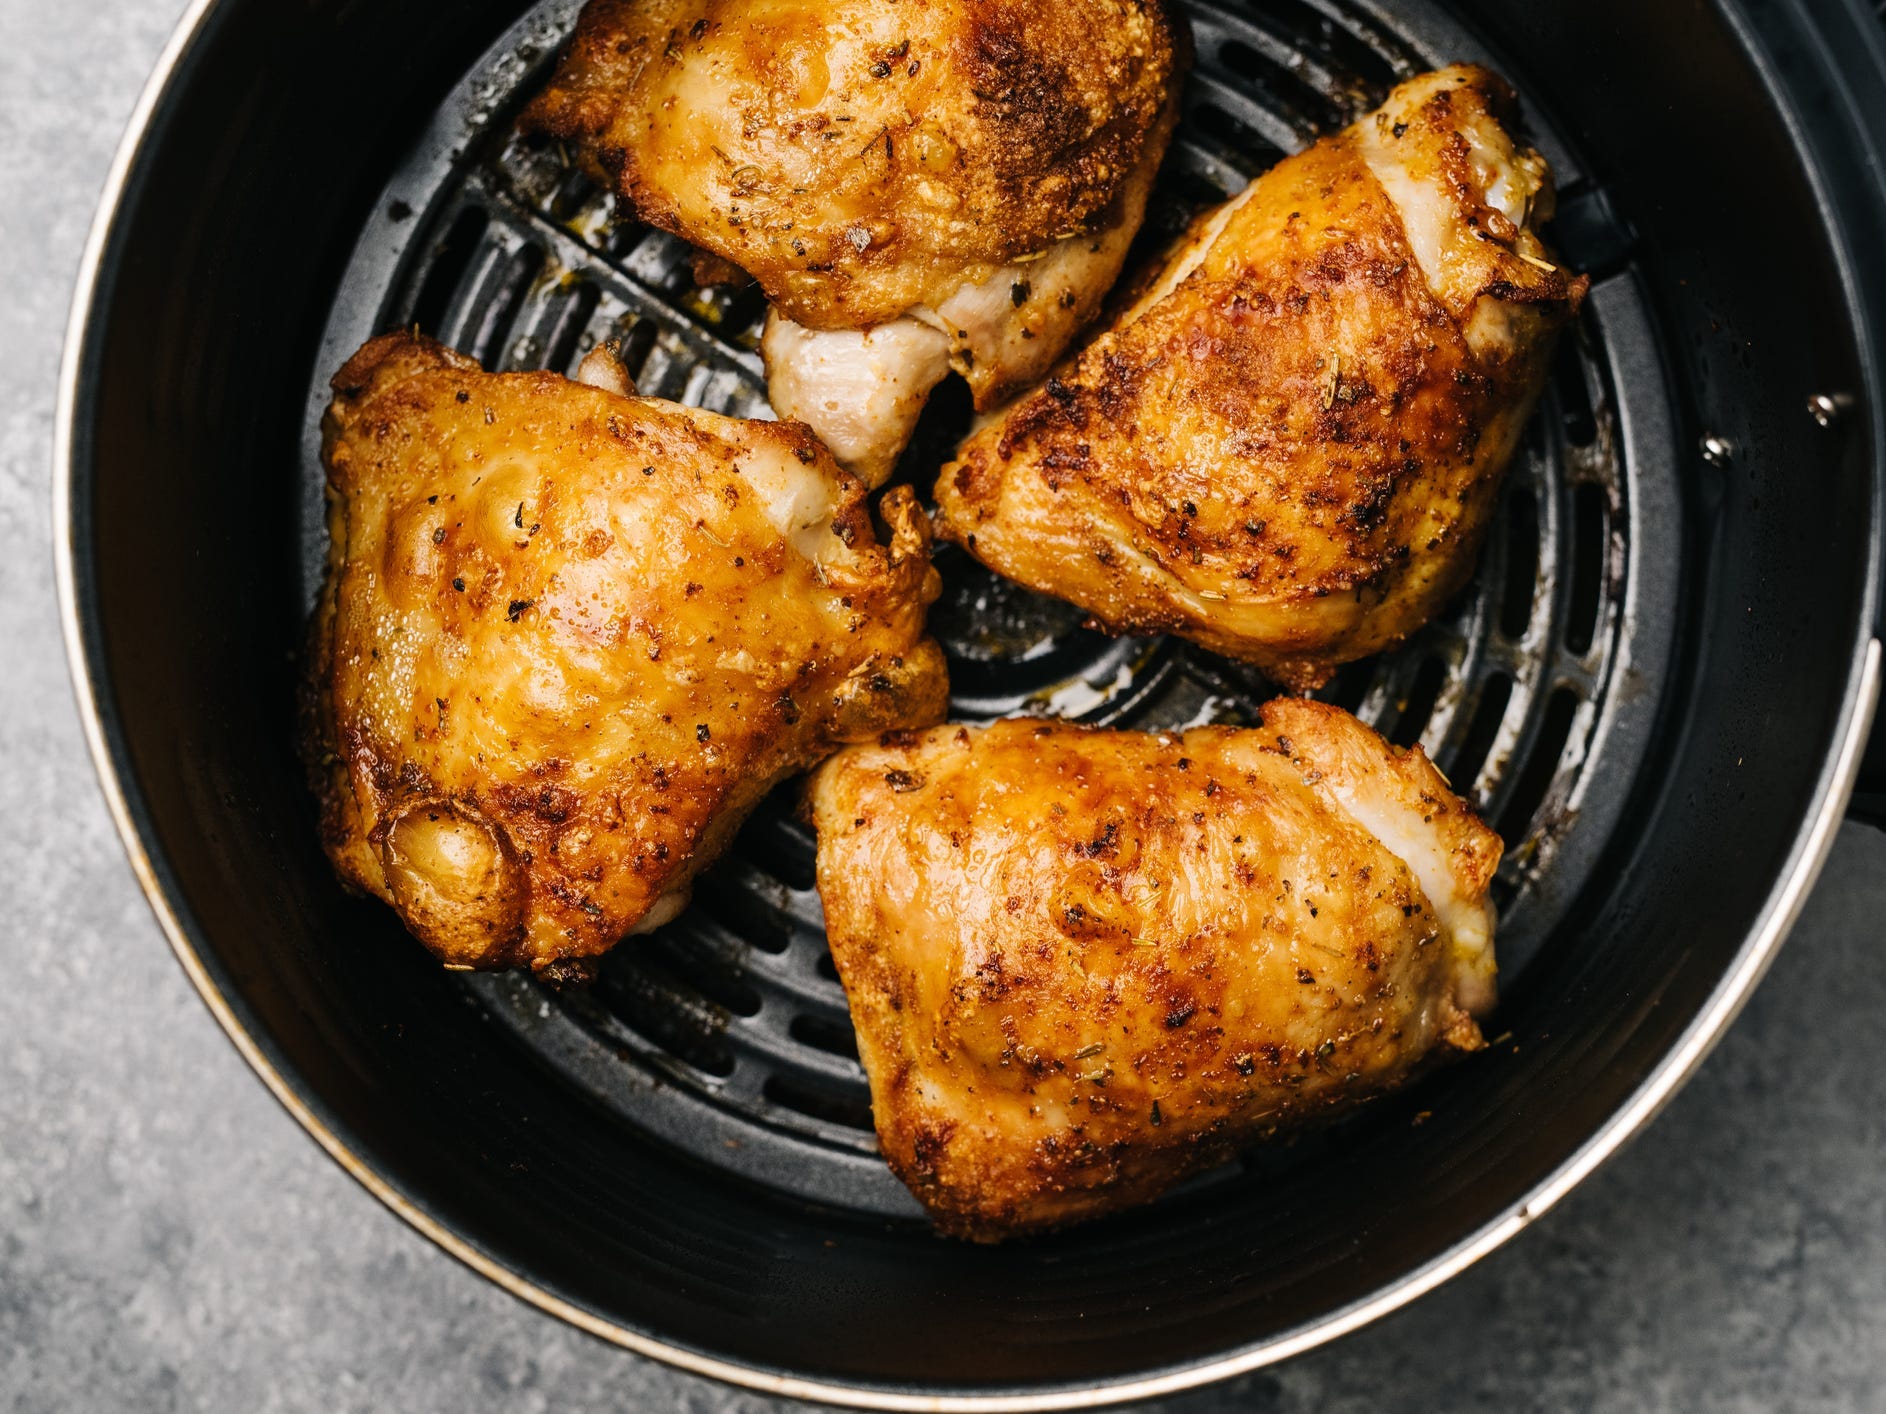 Four chicken thighs in the basket of an air fryer